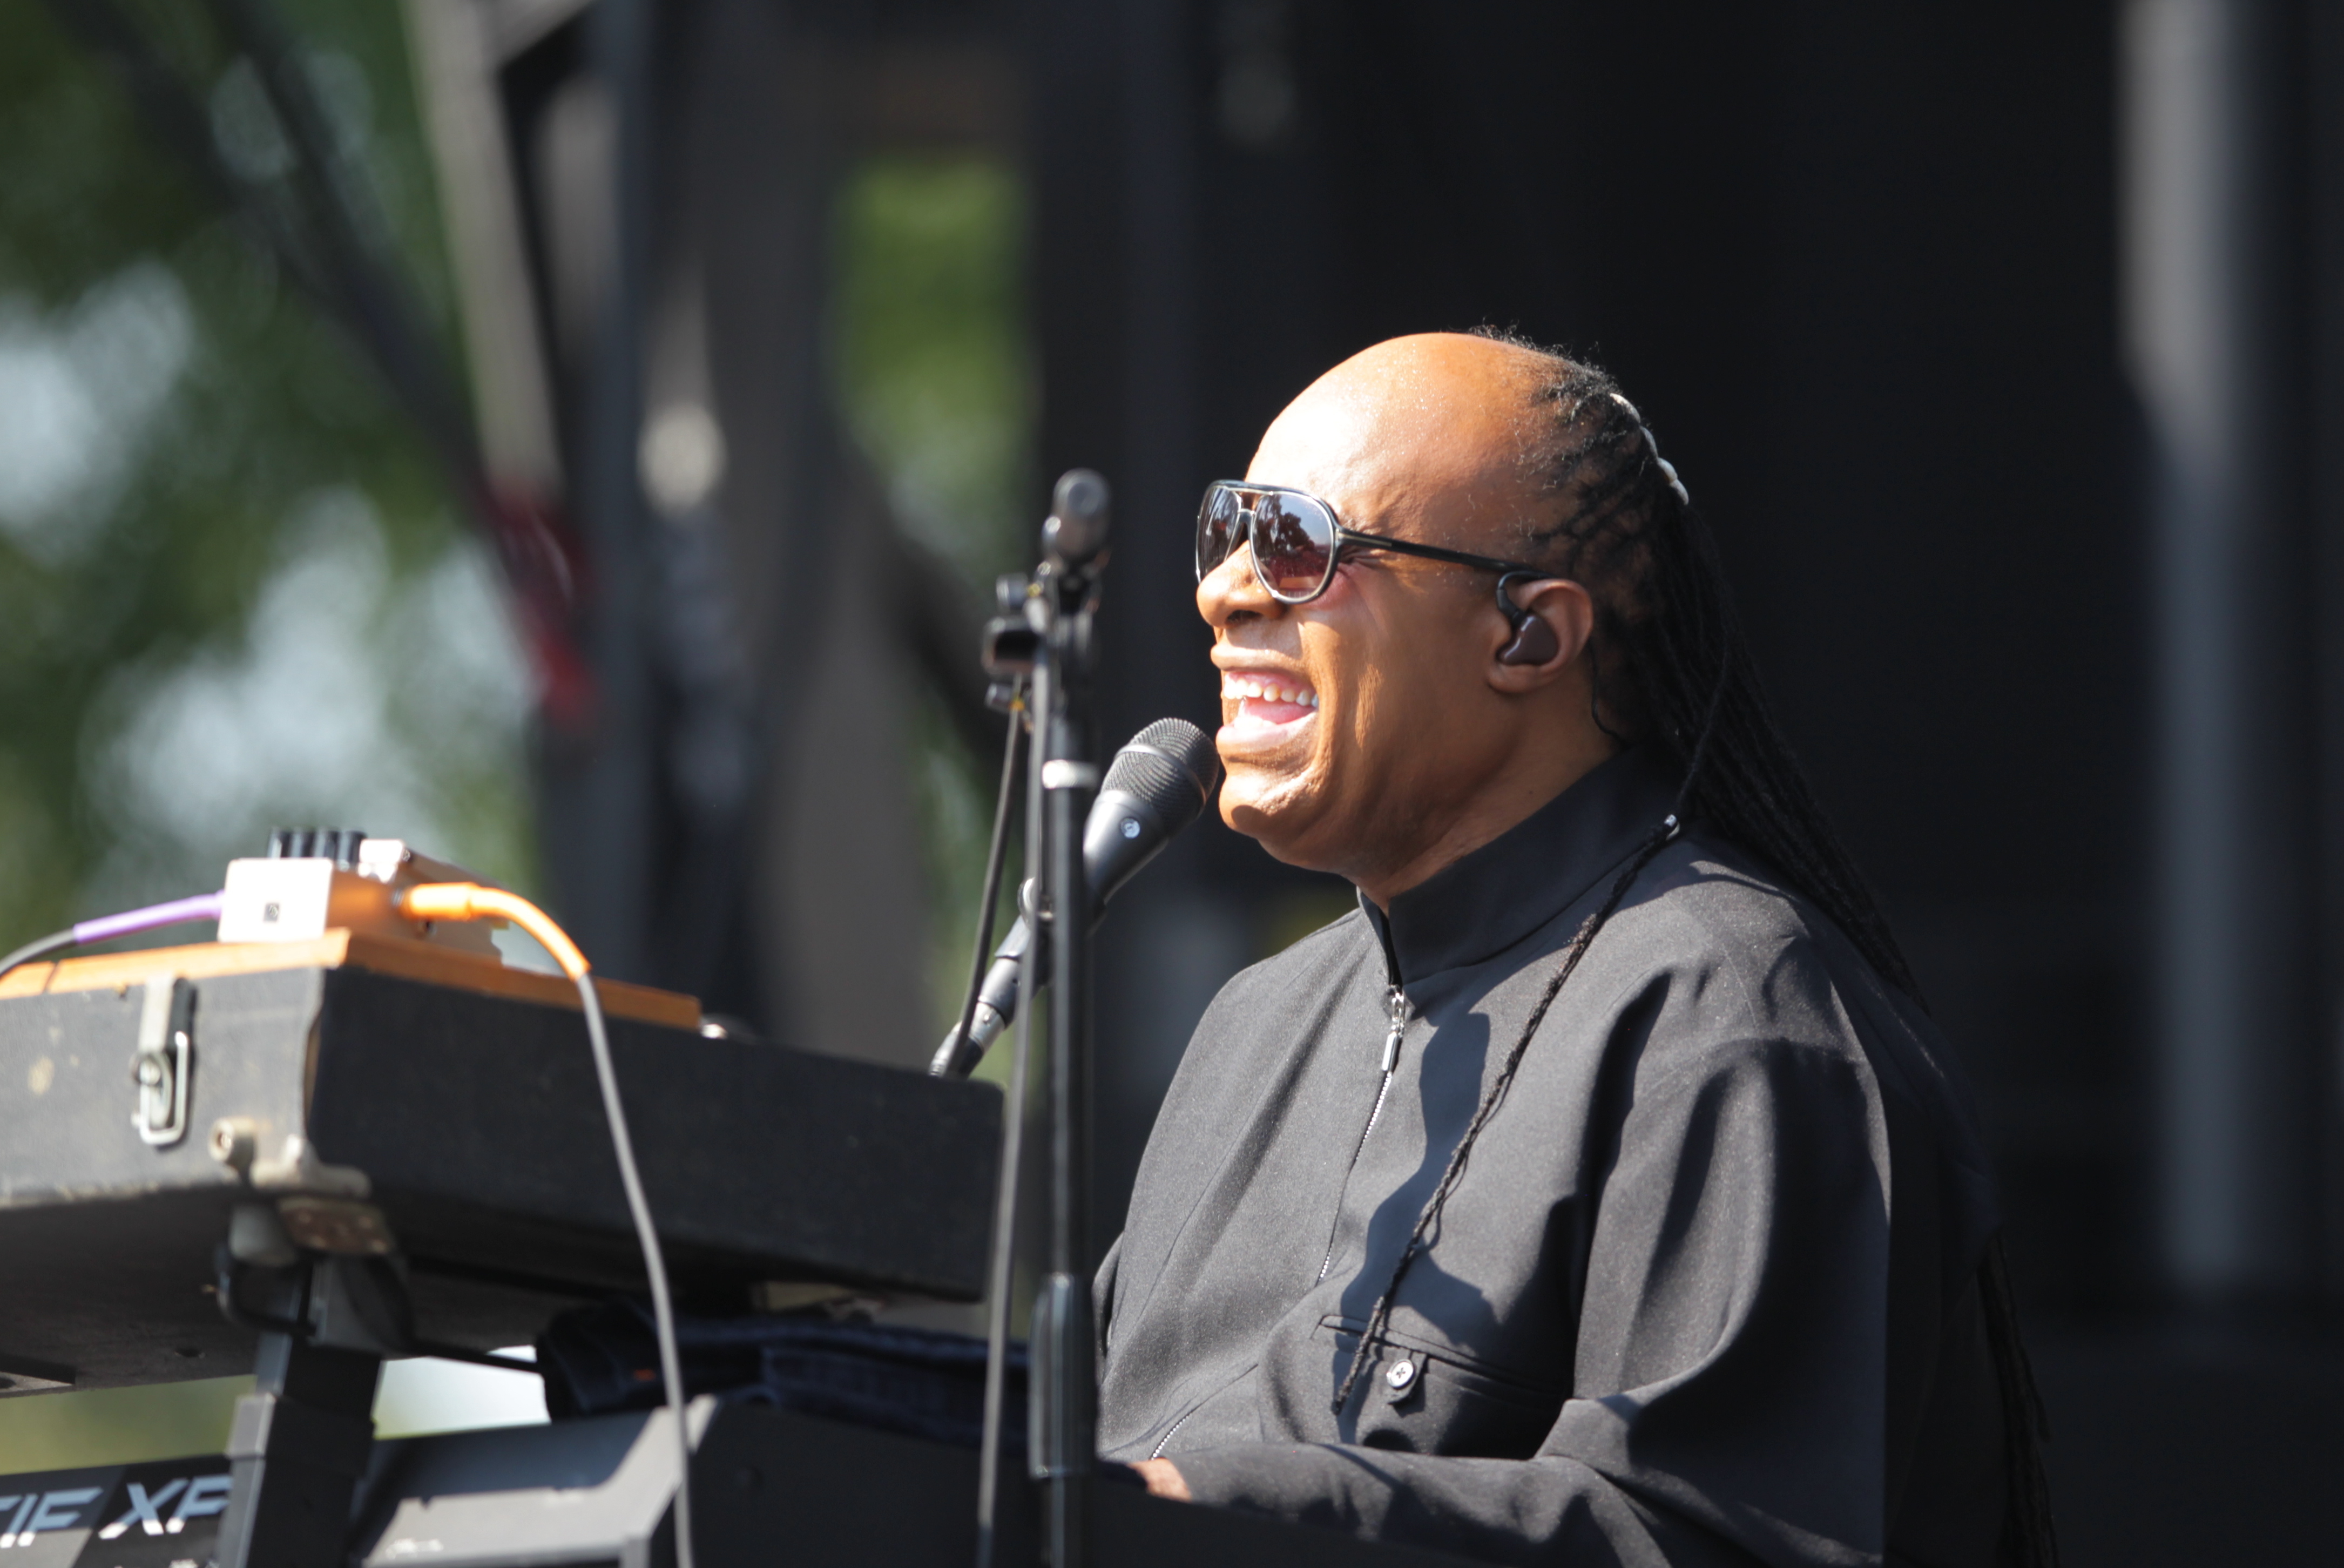 Stevie Wonder performs during a surprise pop up show at Armory Mall